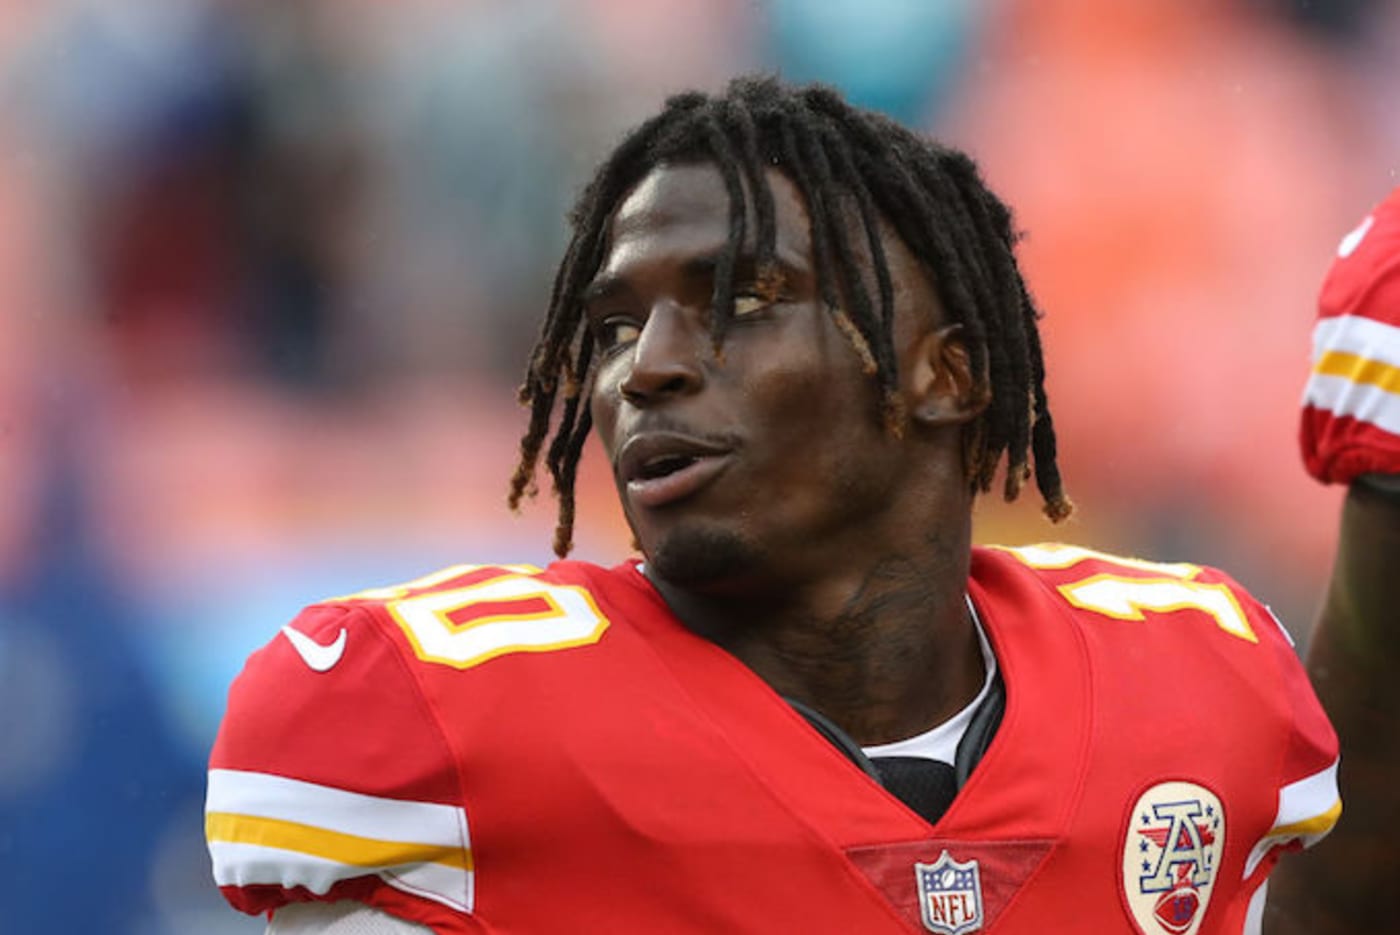 NFL Won’t Suspend Tyreek Hill Following Investigation Into Child Abuse Allegations | Complex